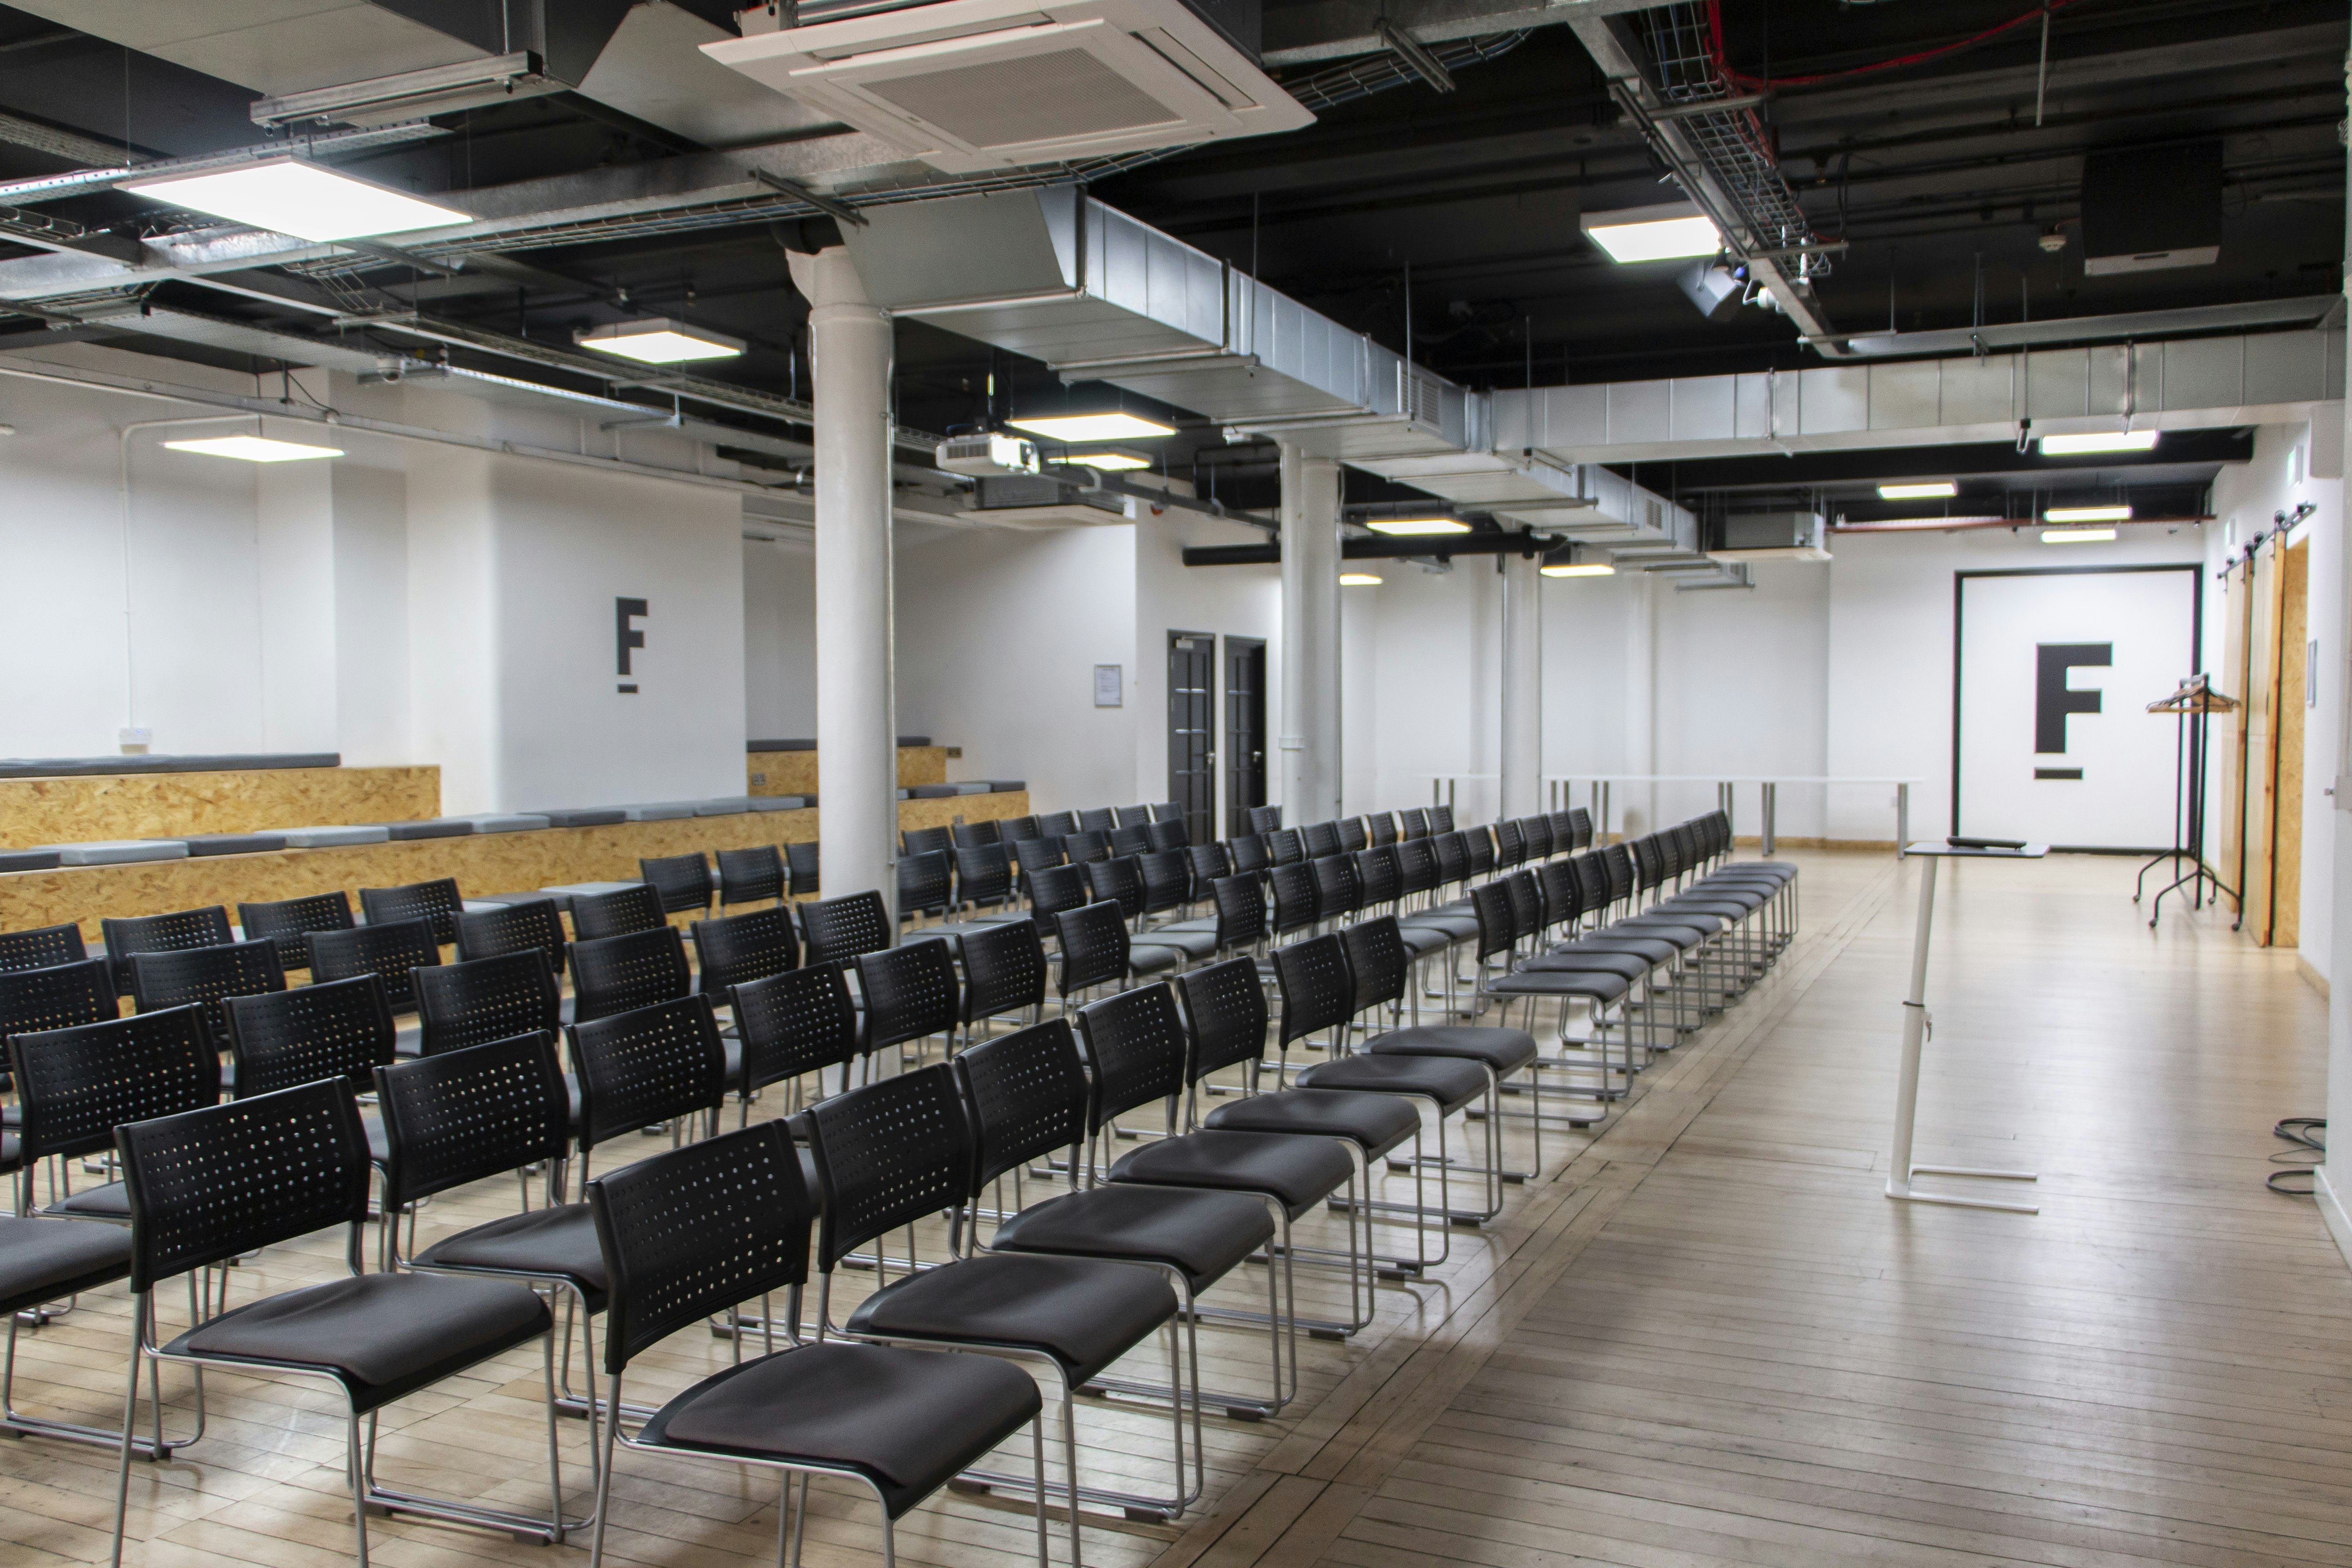 Dry Hire Venues in Manchester - The Federation